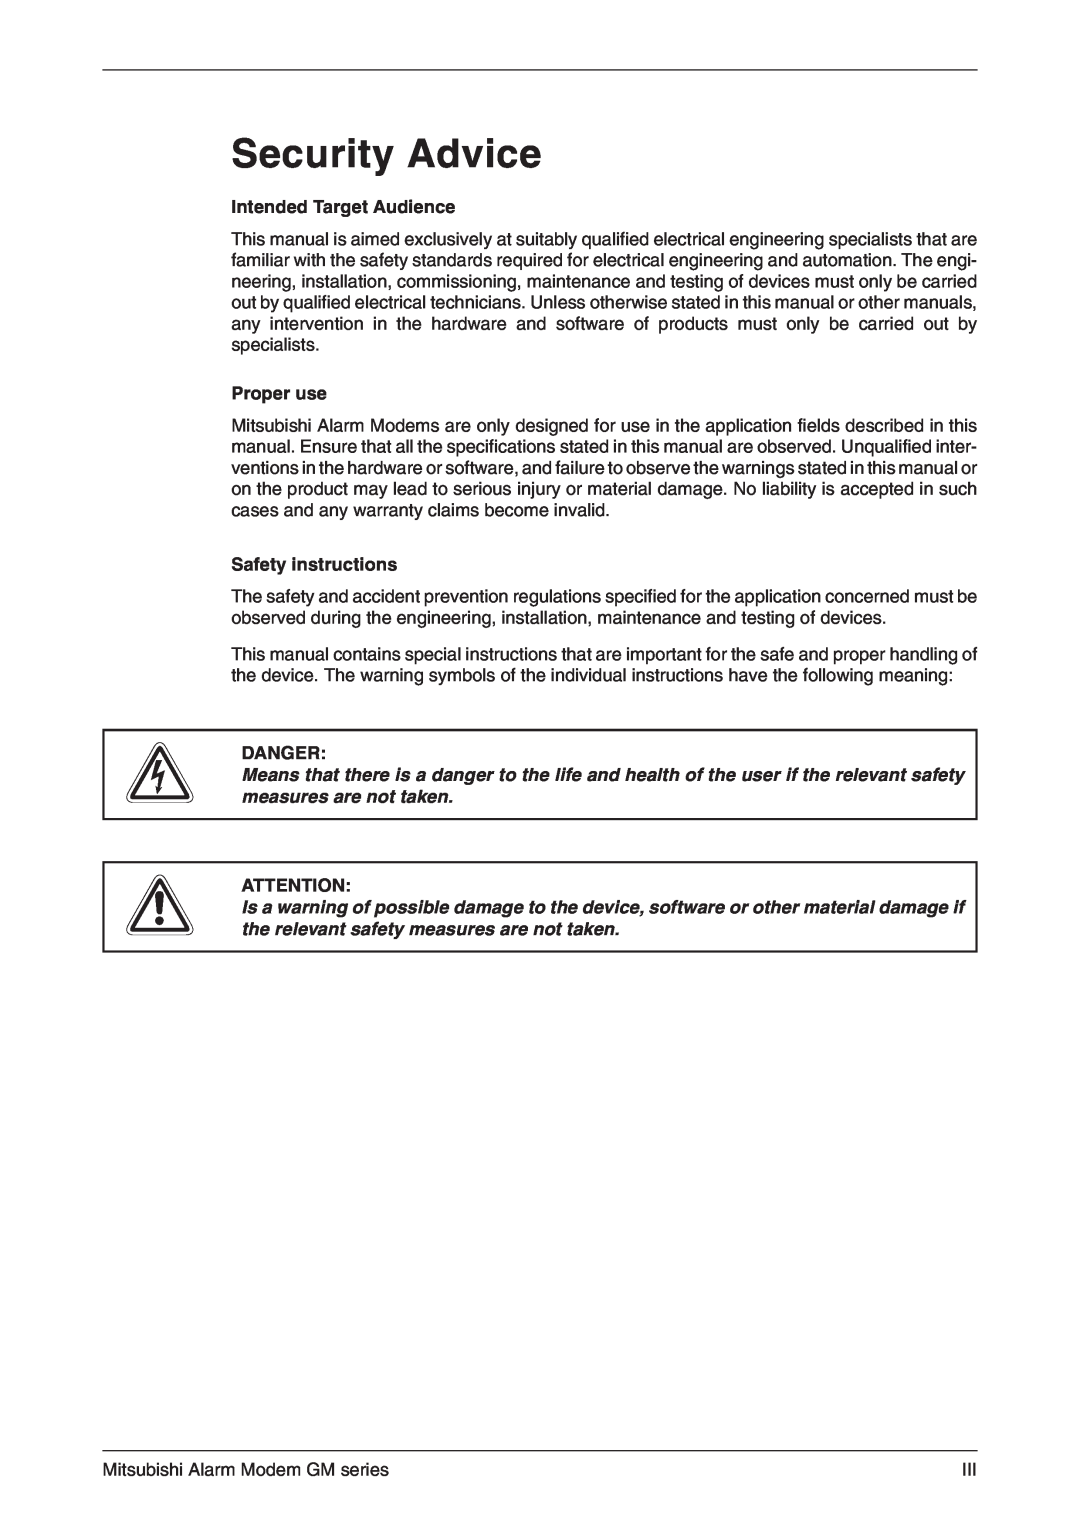 Mitsubishi Electronics MAM-GM20 Security Advice, Intended Target Audience, Proper use, Safety instructions, P Danger 